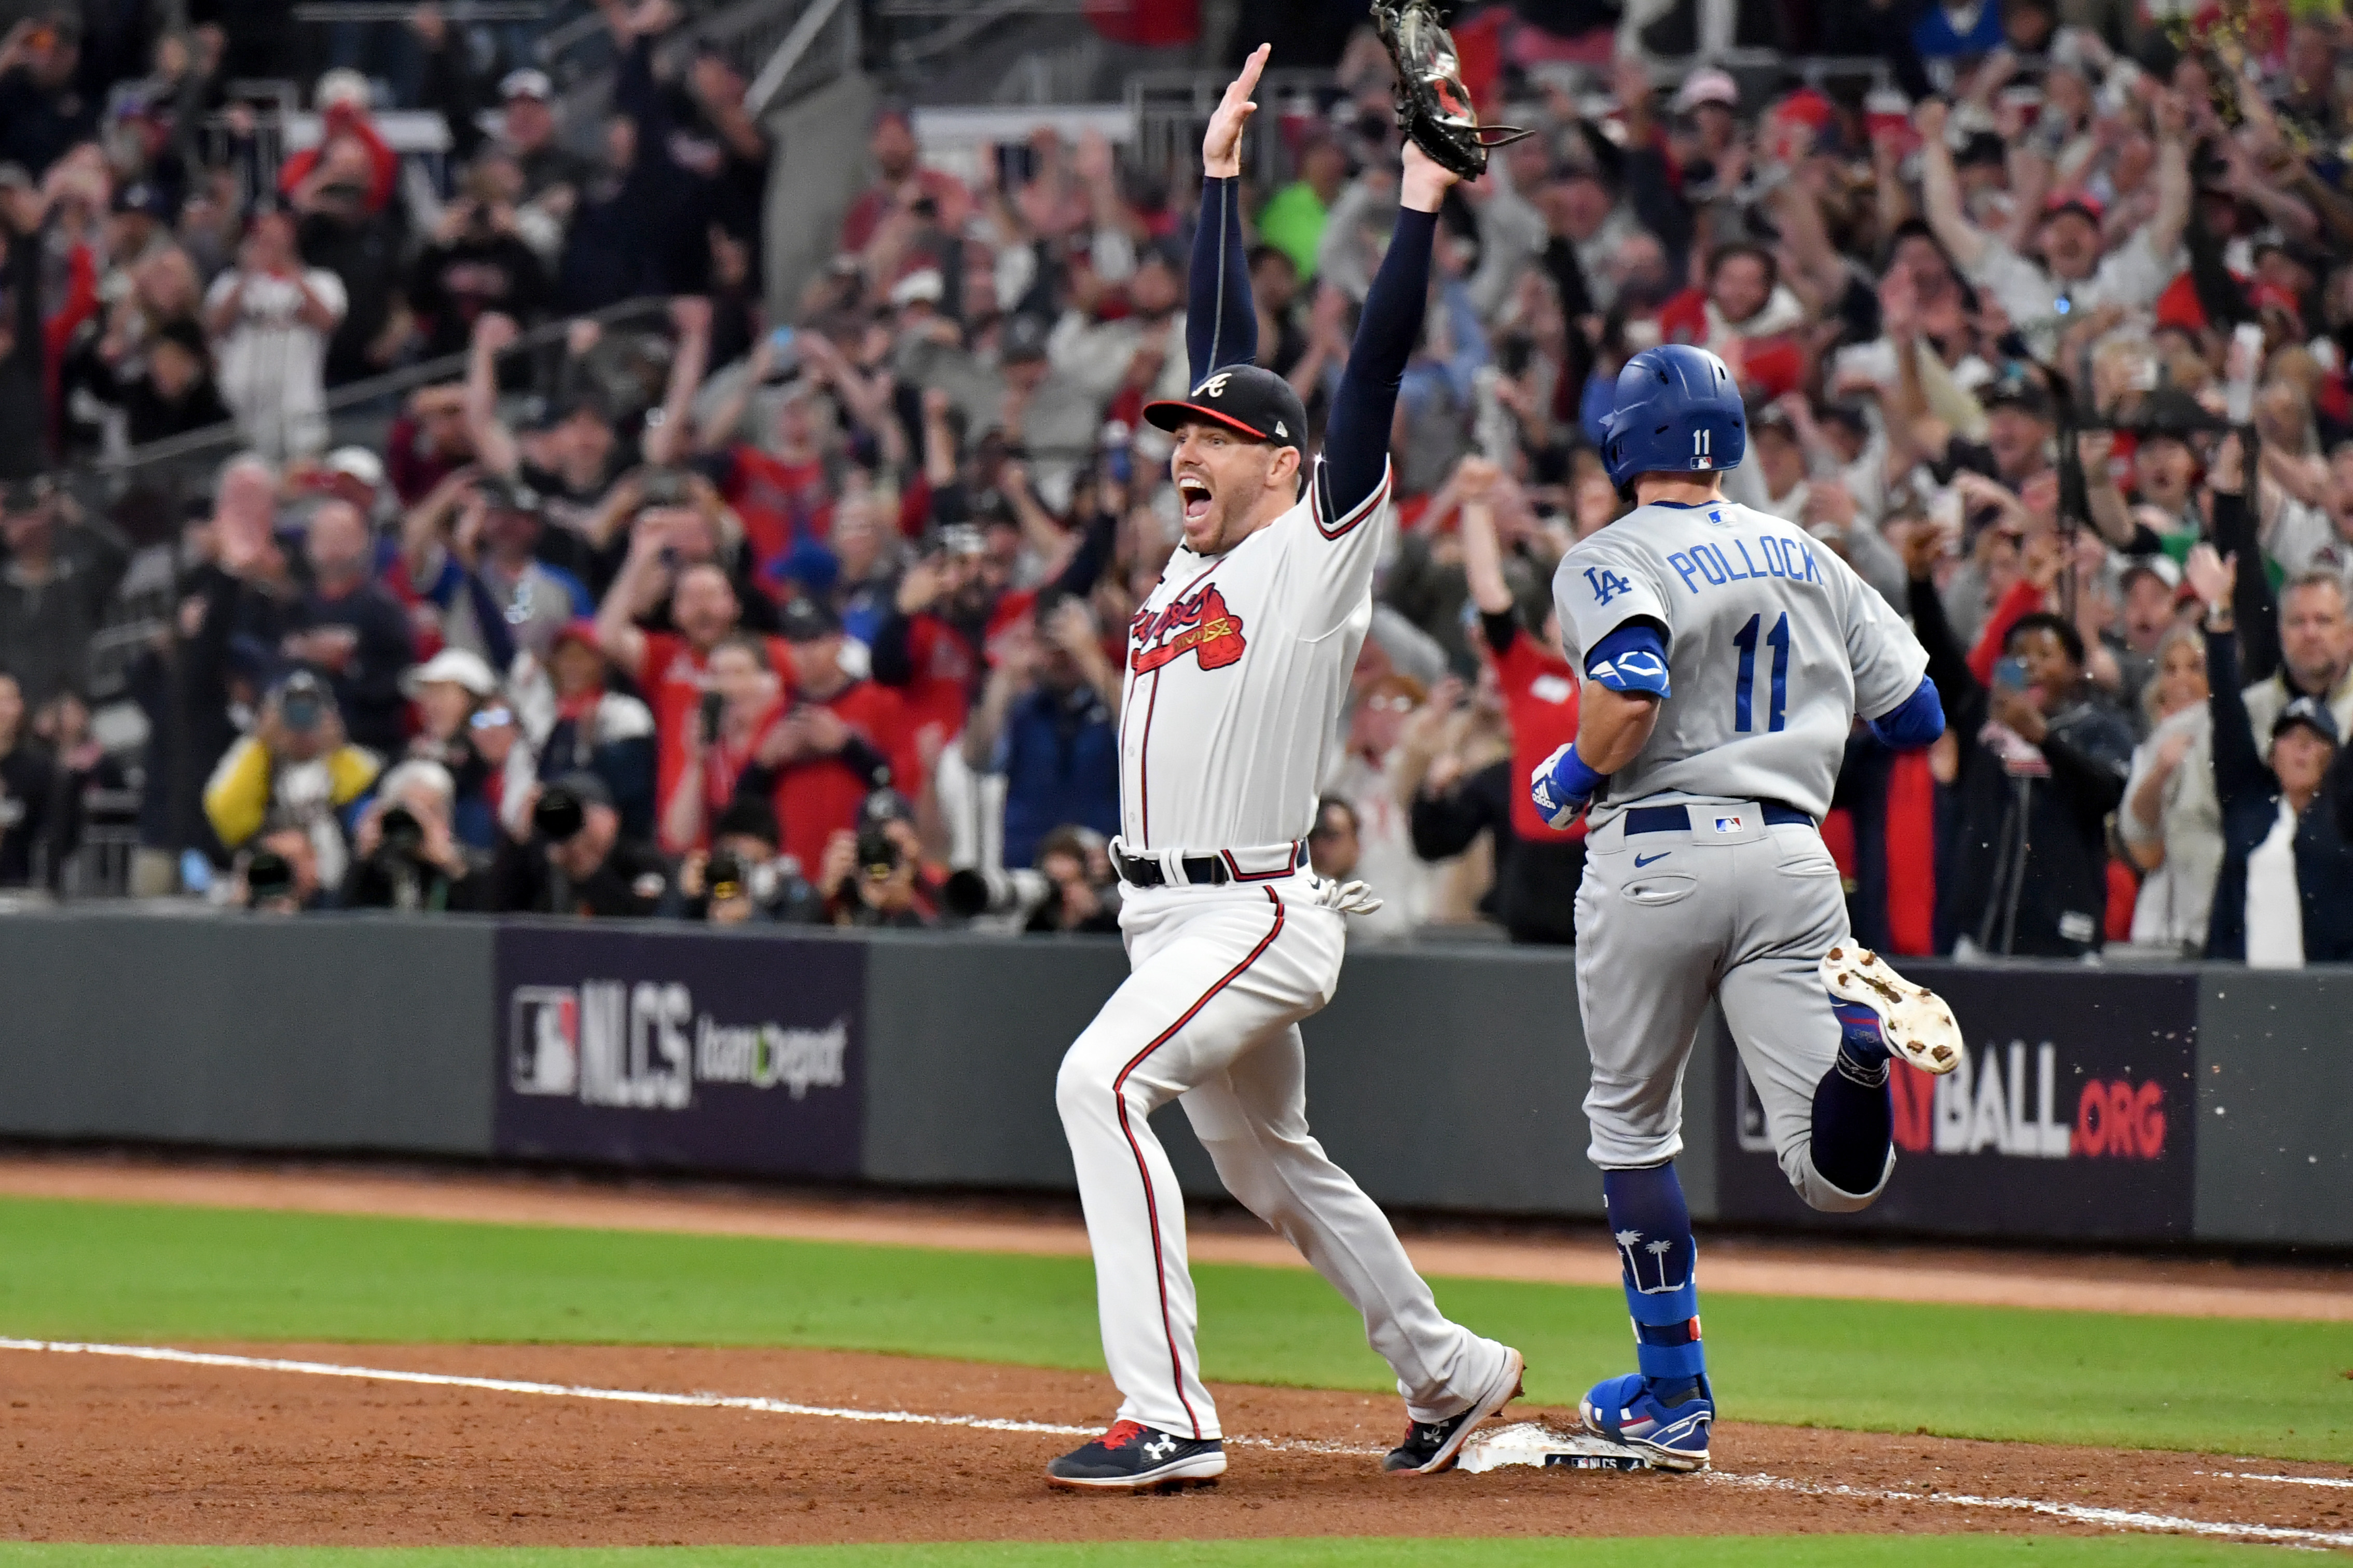 One fatal flaw that will prevent Braves from winning World Series